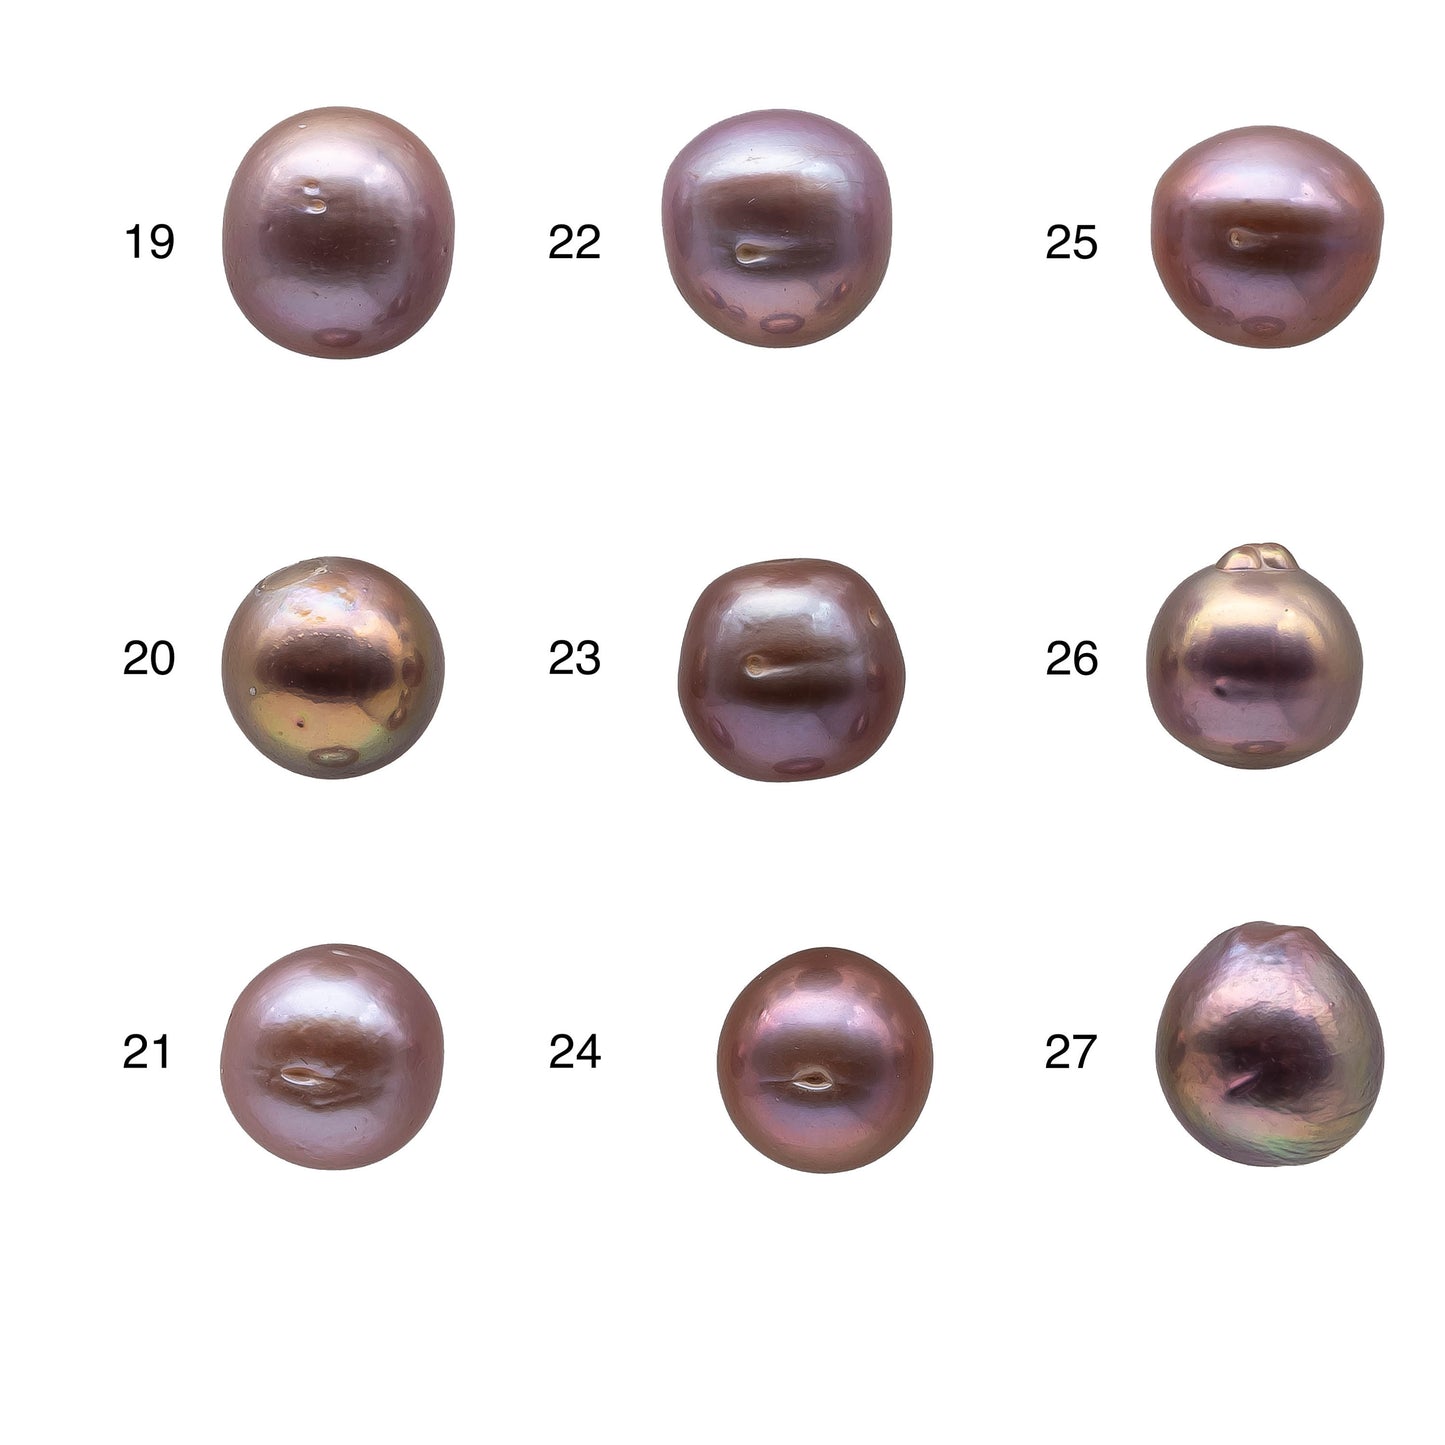 10-11mm One Piece Edison Pearl Tear Drop Loose Undrilled Freshwater Pearl with Blemish and Beautiful Luster, SKU # 1159EP